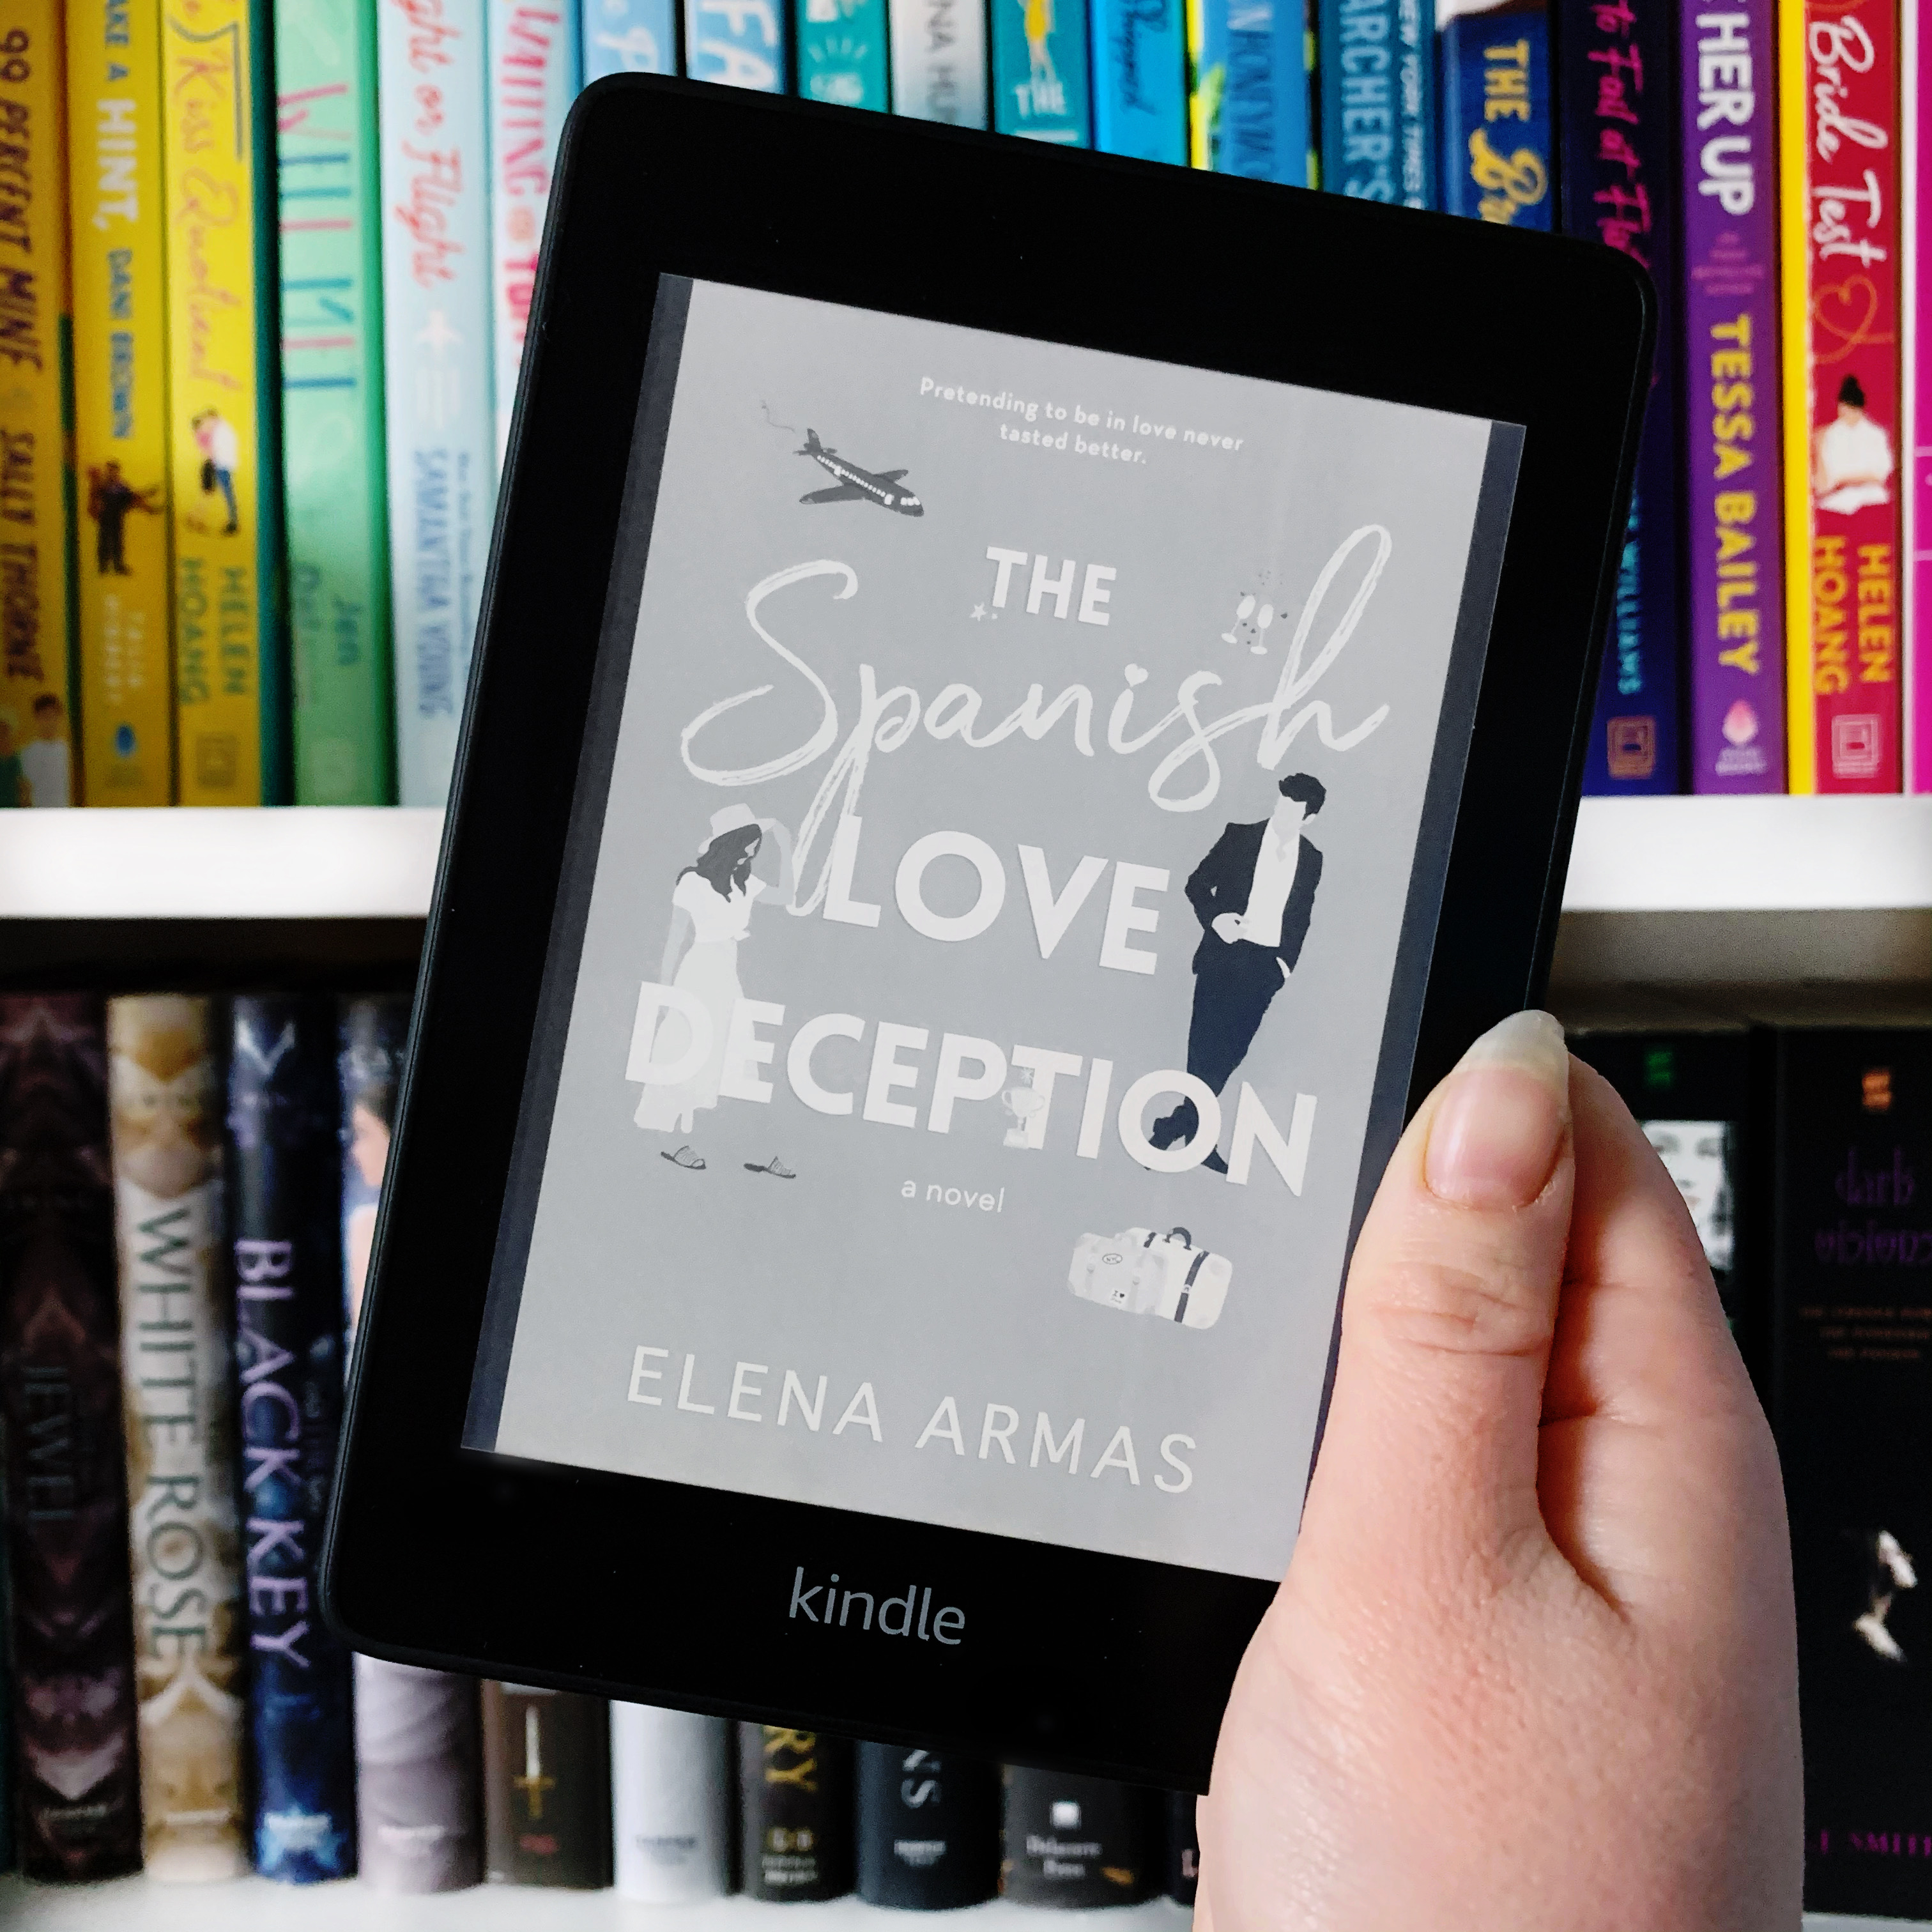 Romance, Books, All New Releases, Spanish